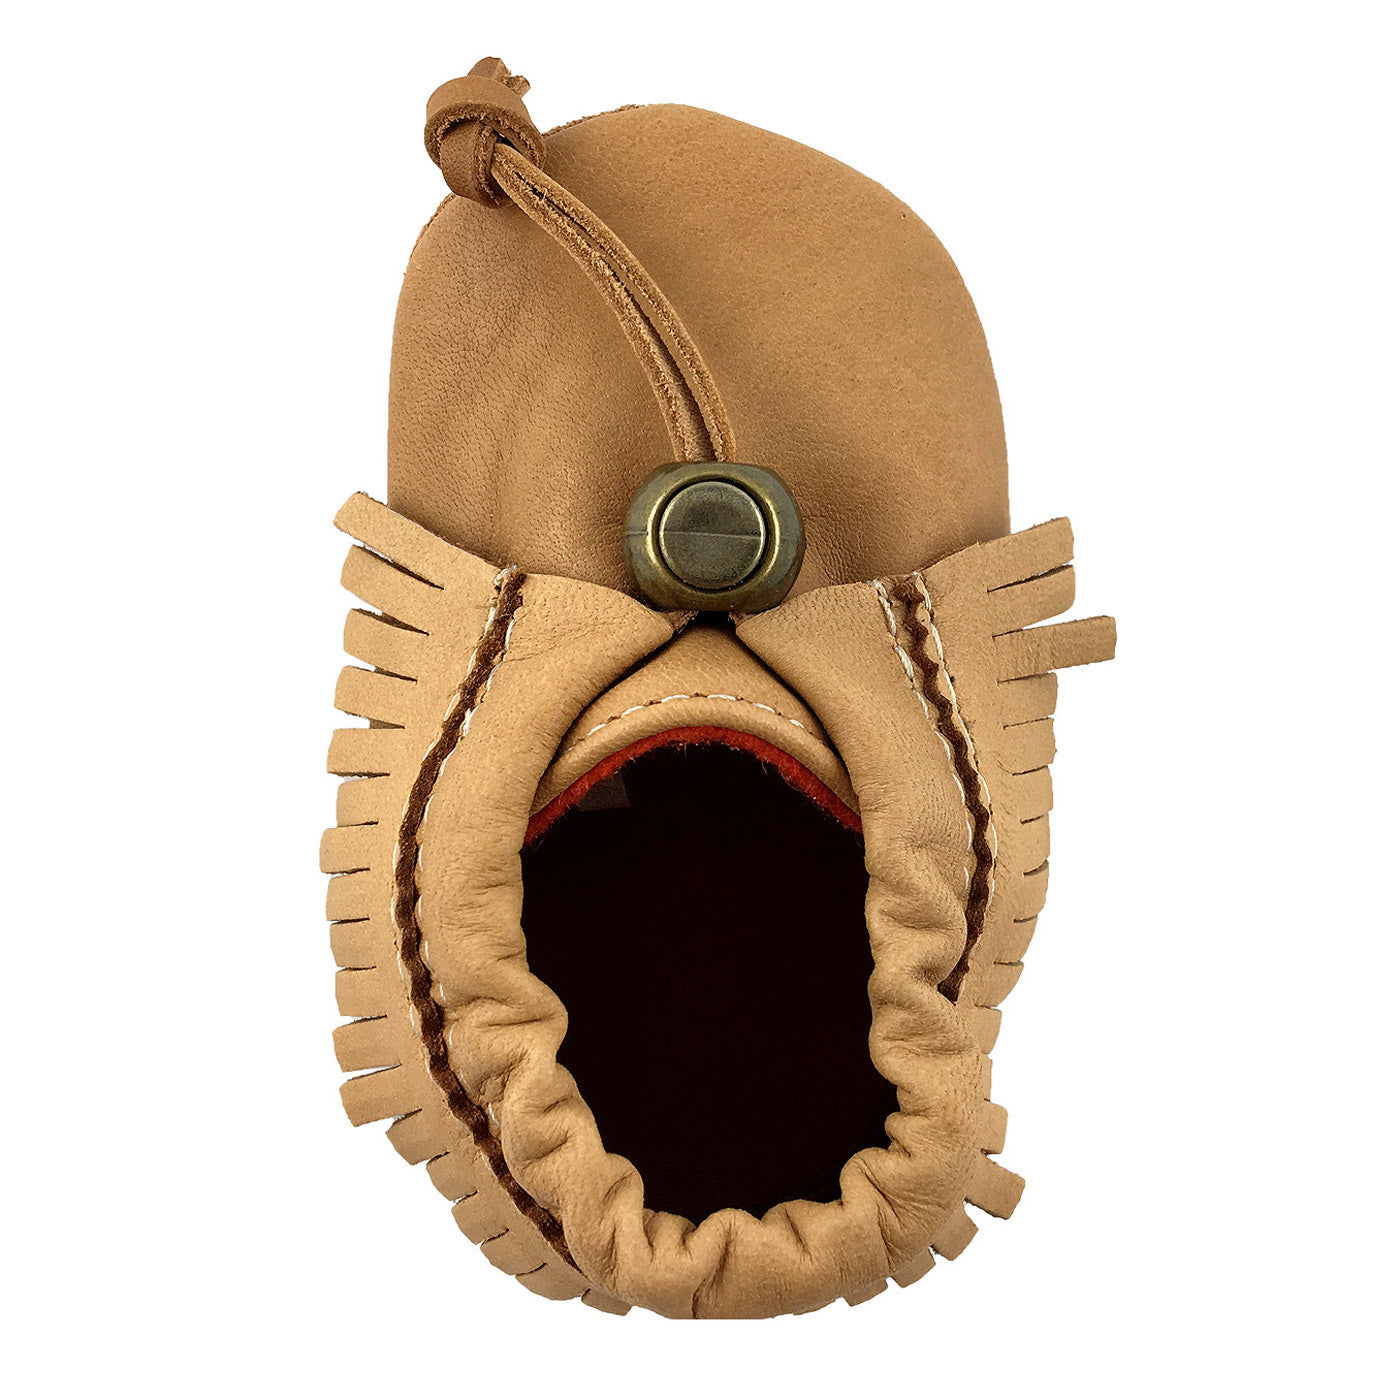 authentic baby moccasins